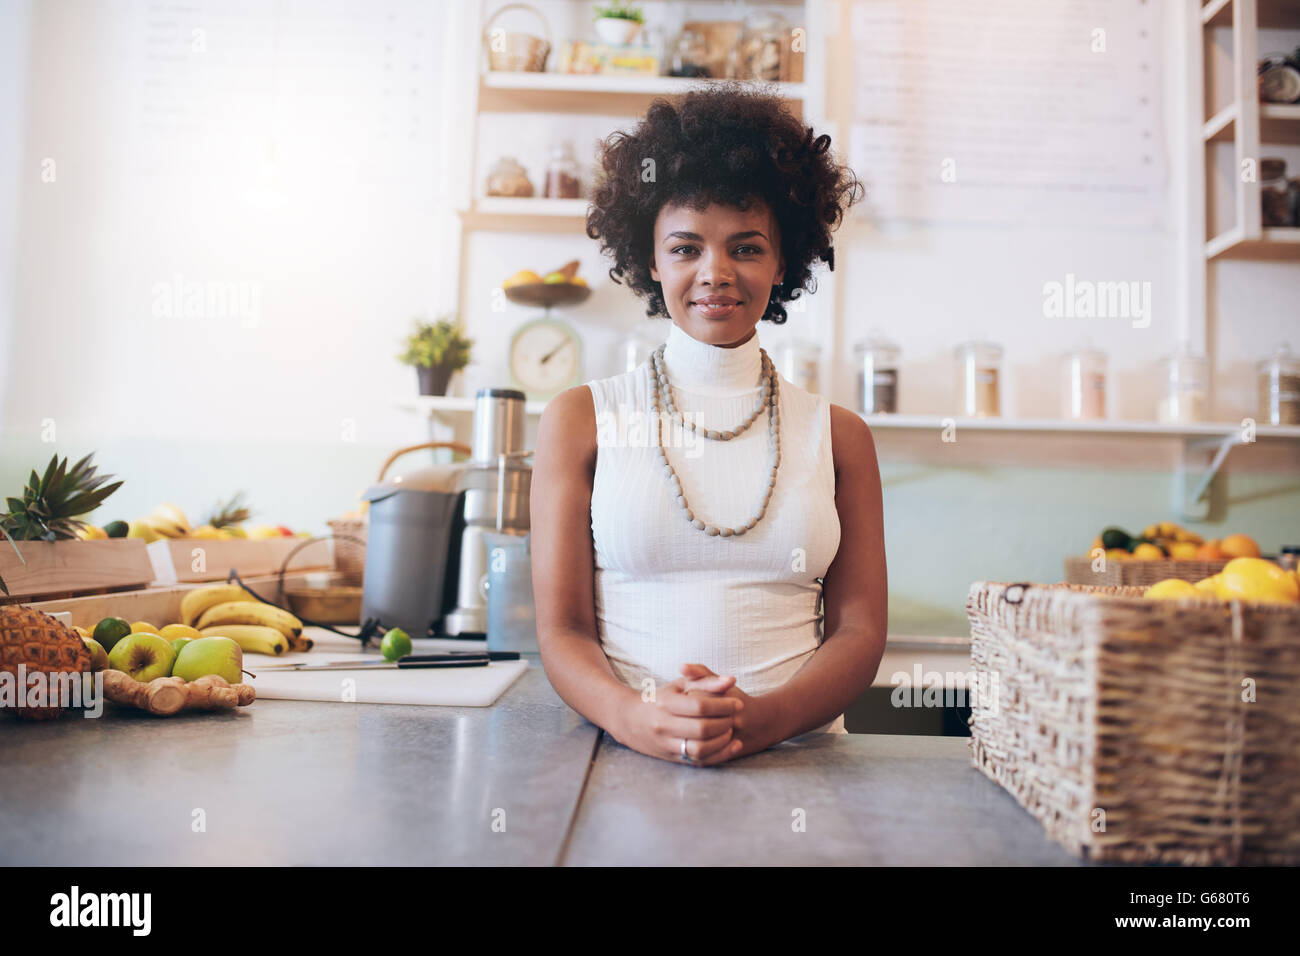 Portrait of attractive young woman working at juice bar, she is standing behind counter looking at camera. Stock Photo